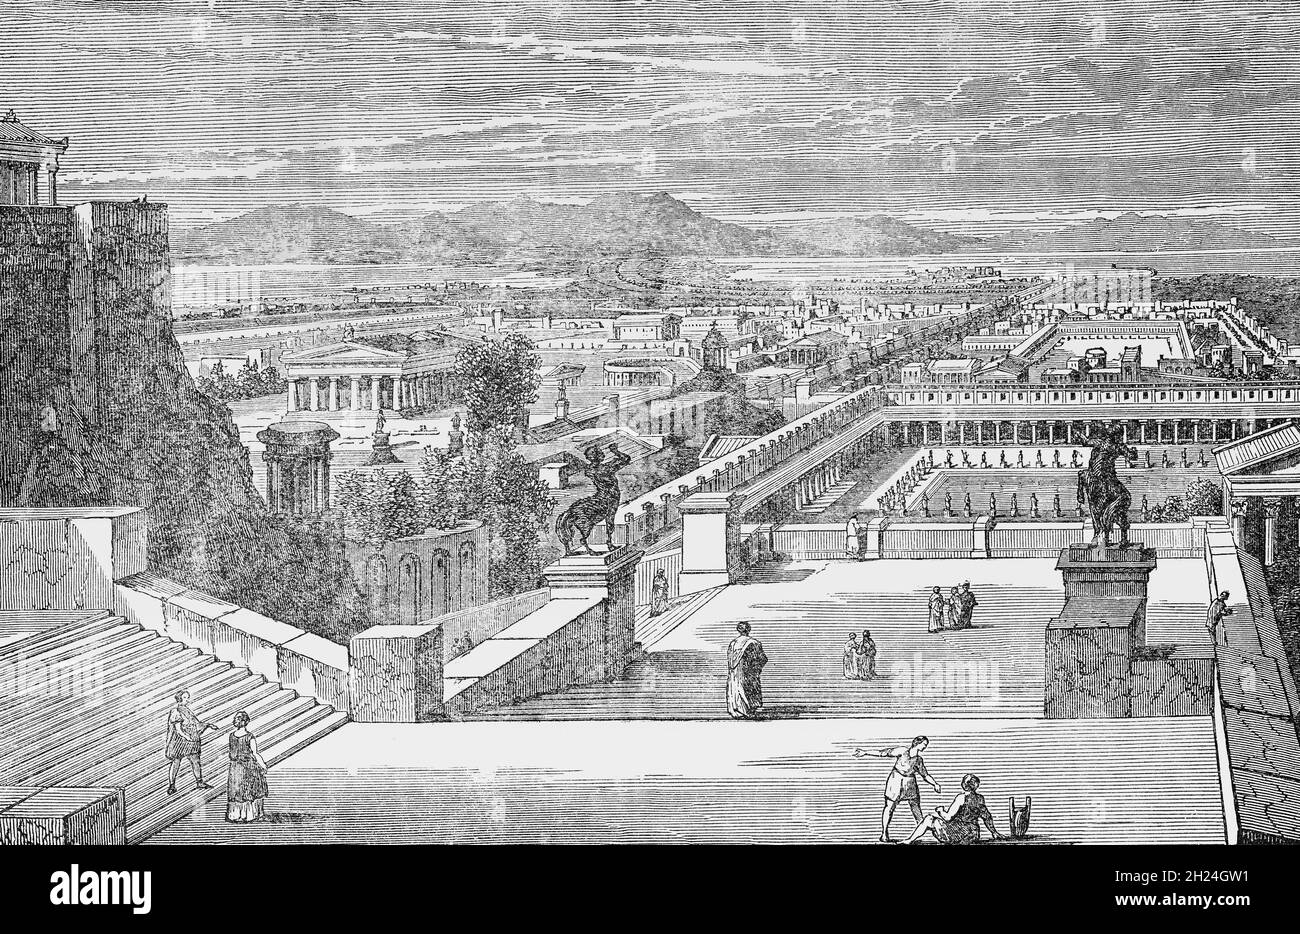 A late 19th Century illustration of Corinth, a former municipality in Corinthia, Peloponnese, which is located in south-central Greece. It begin in the early 8th century BC, when Corinth began to develop as a commercial center. In 146 BC, Corinth was captured and was completely destroyed by the Roman army. As a newly rebuilt Roman colony in 44 BC, Corinth flourished and became the administrative capital of the Roman province of Achaea. Stock Photo